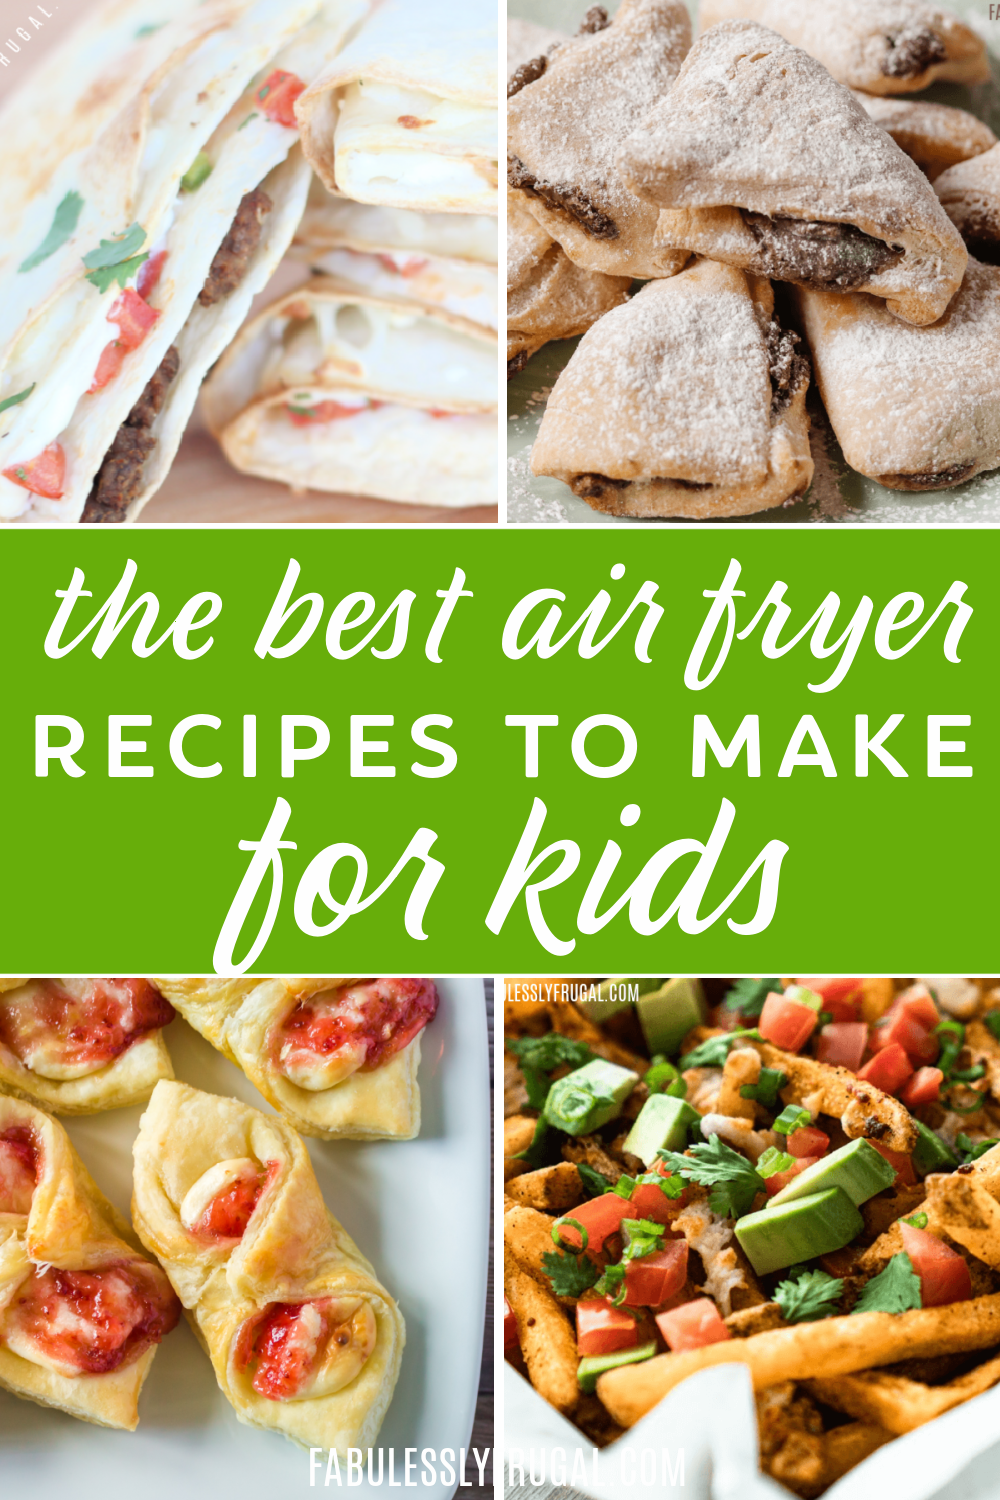 https://fabulesslyfrugal.com/wp-content/uploads/2021/09/The-best-air-fryer-recipes-for-kids-2.png